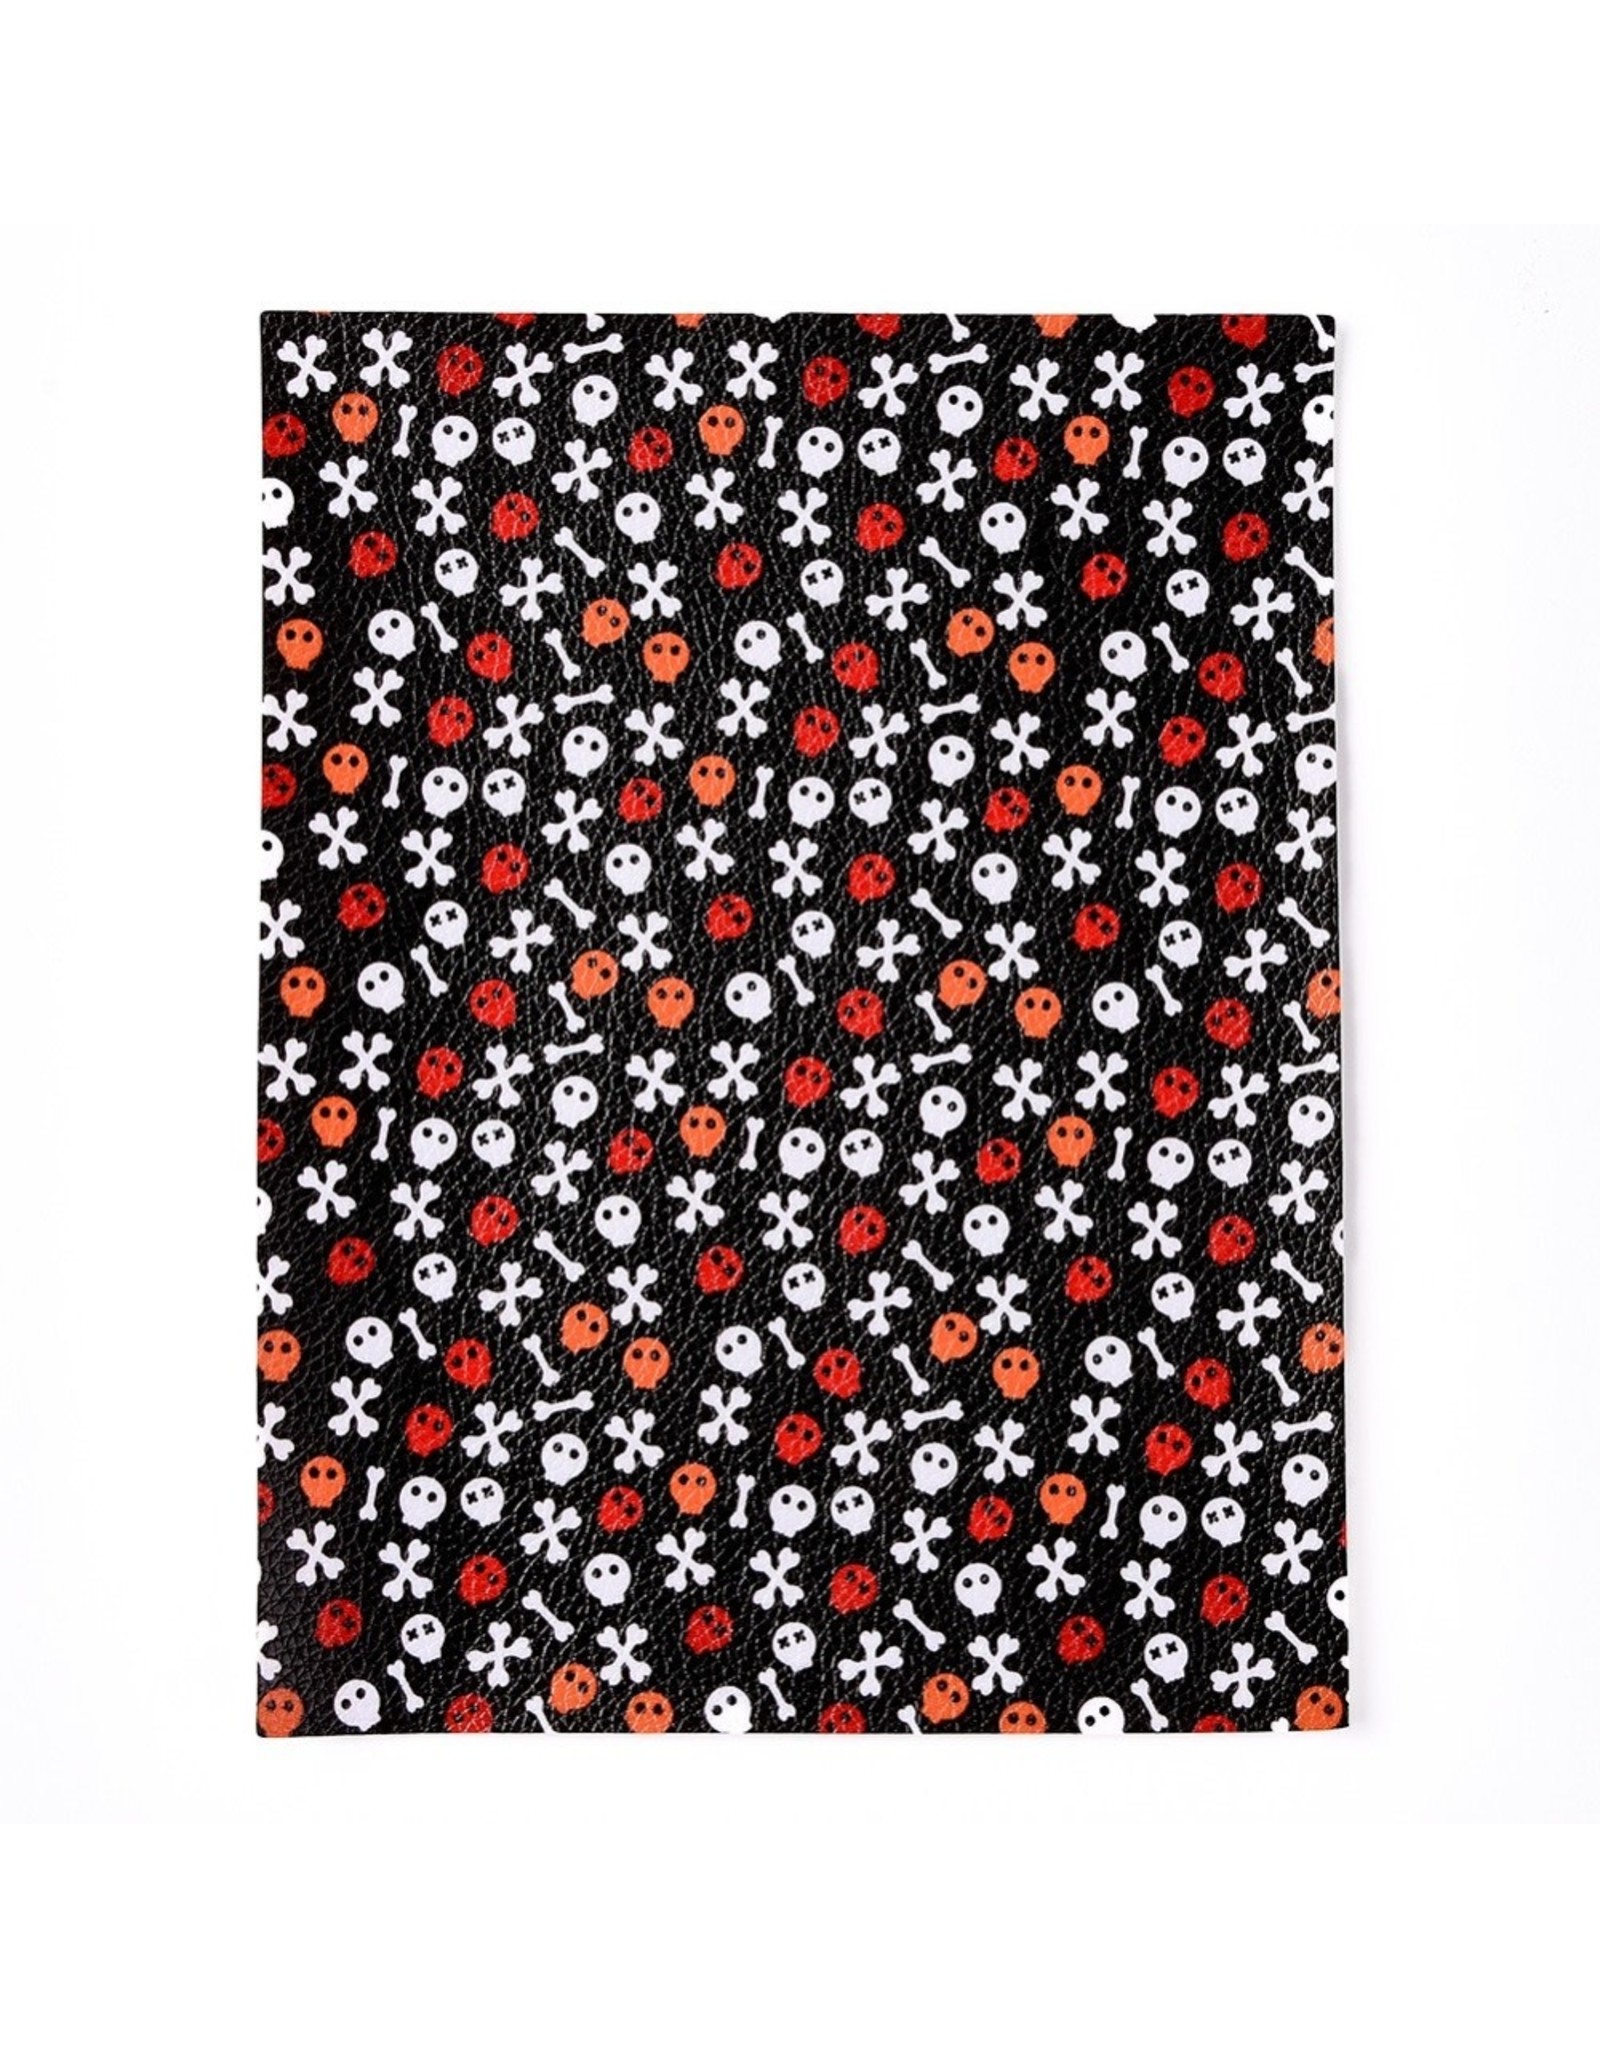 Faux Leather Beading Backing Black with Red/White/Orange Skull and Bones  .5mm thick 8x6"”